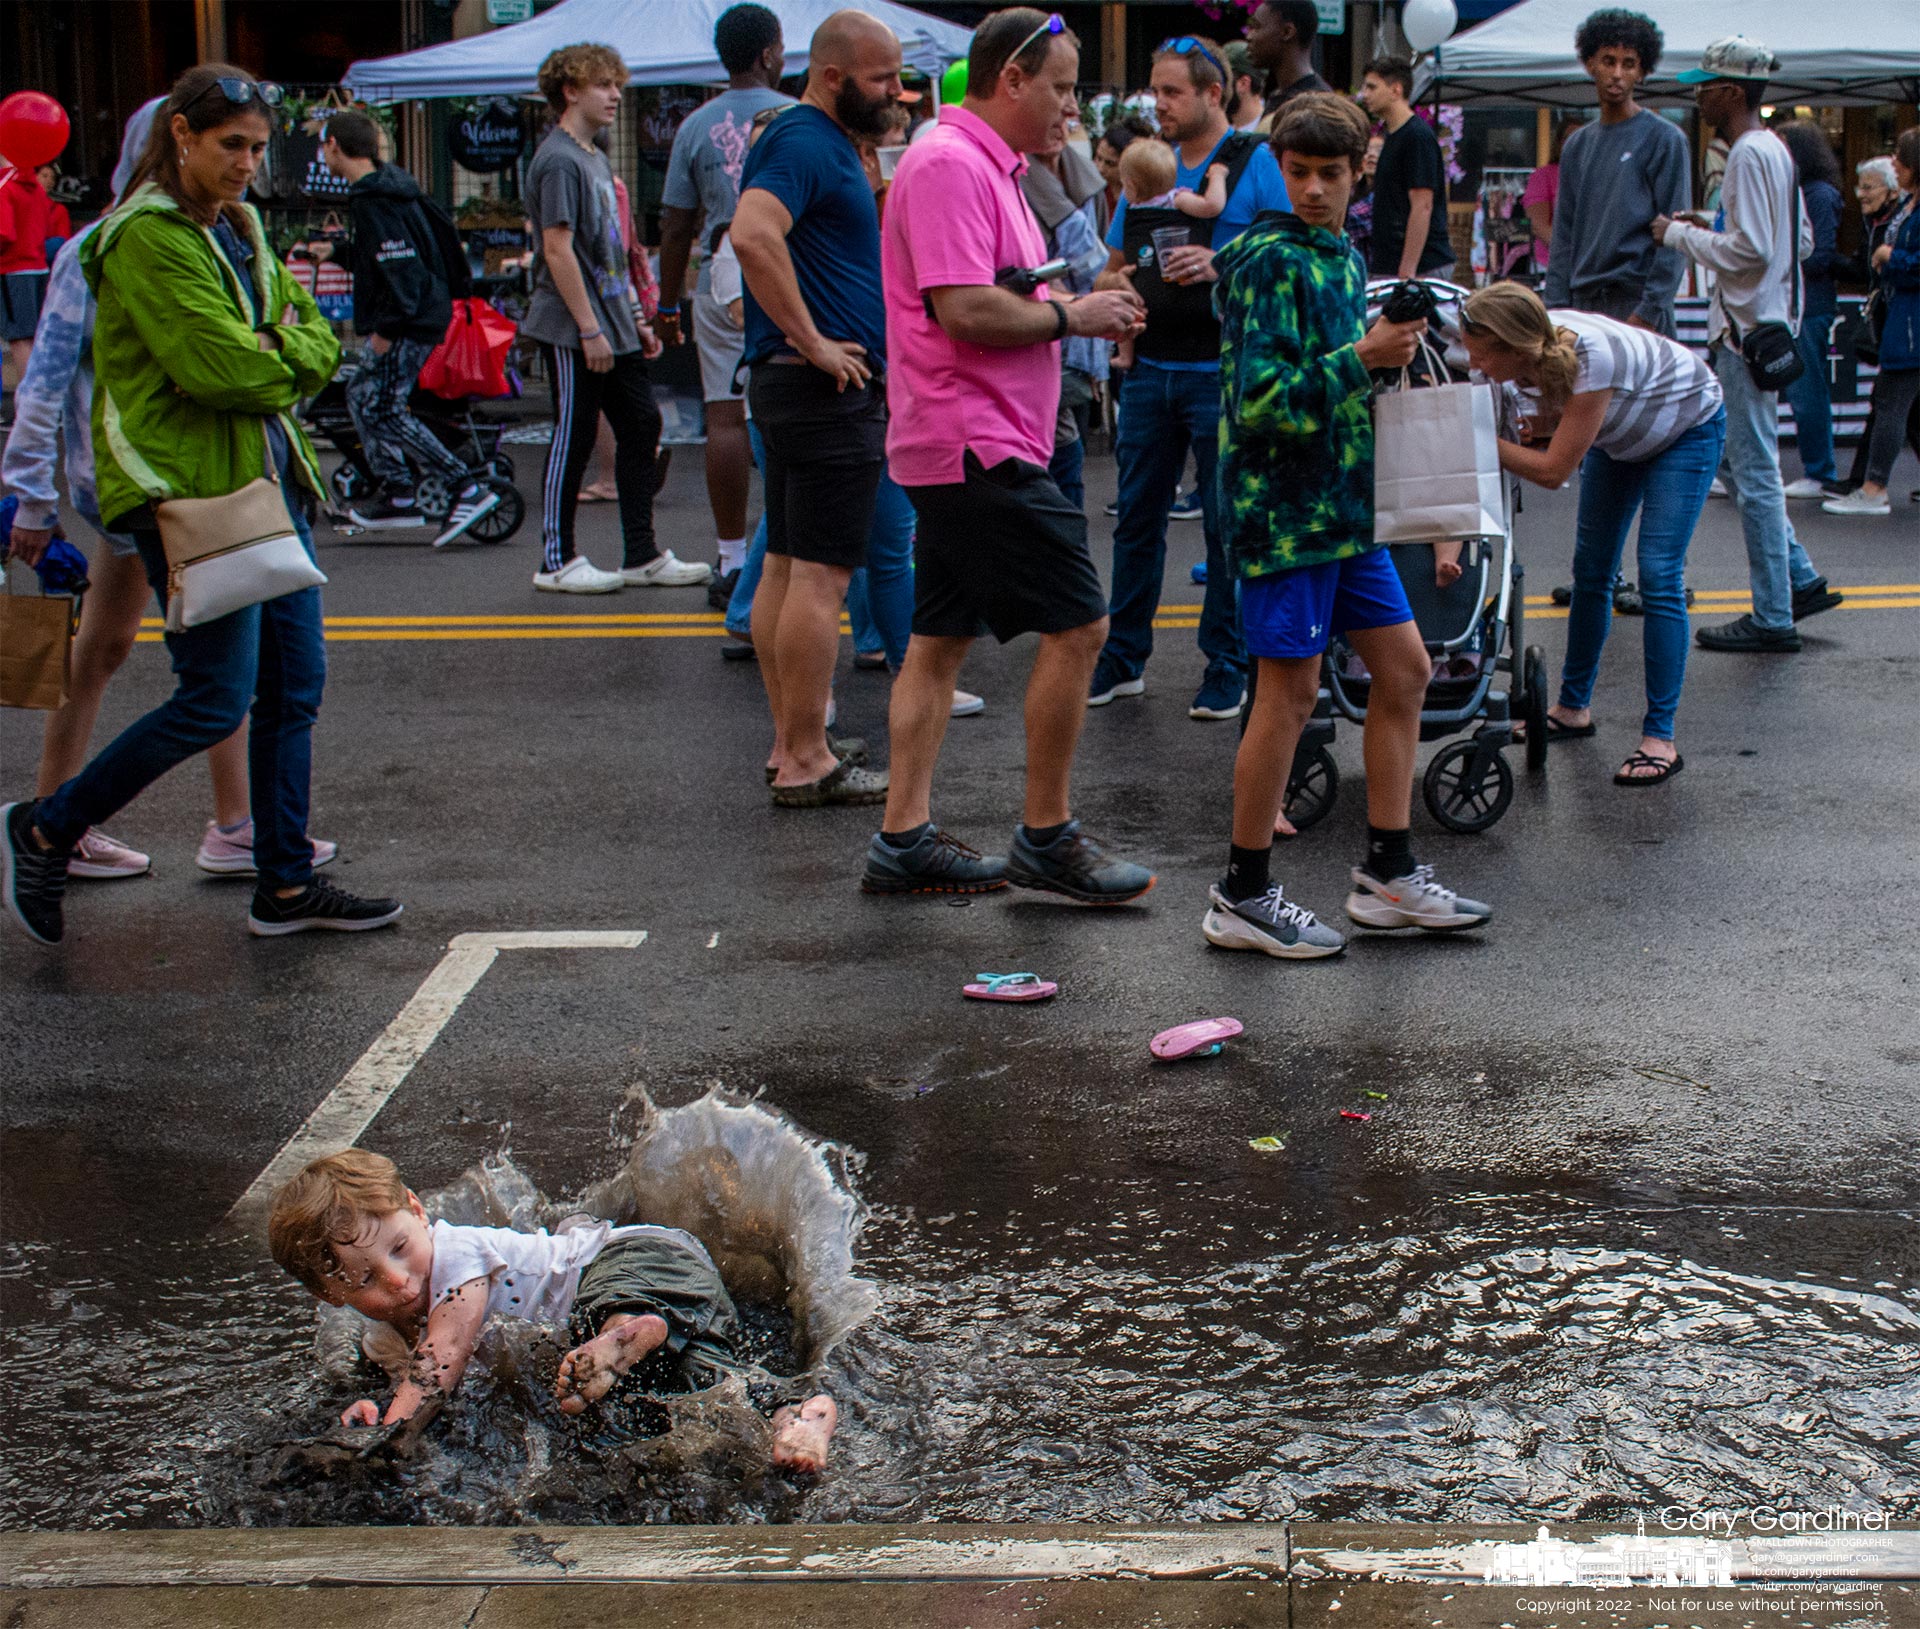 A youngster falls into the puddle he and two of his friends had been running through after a brief rain during Fourth Friday in Uptown Westerville. My Final Photo for May 27, 2022.